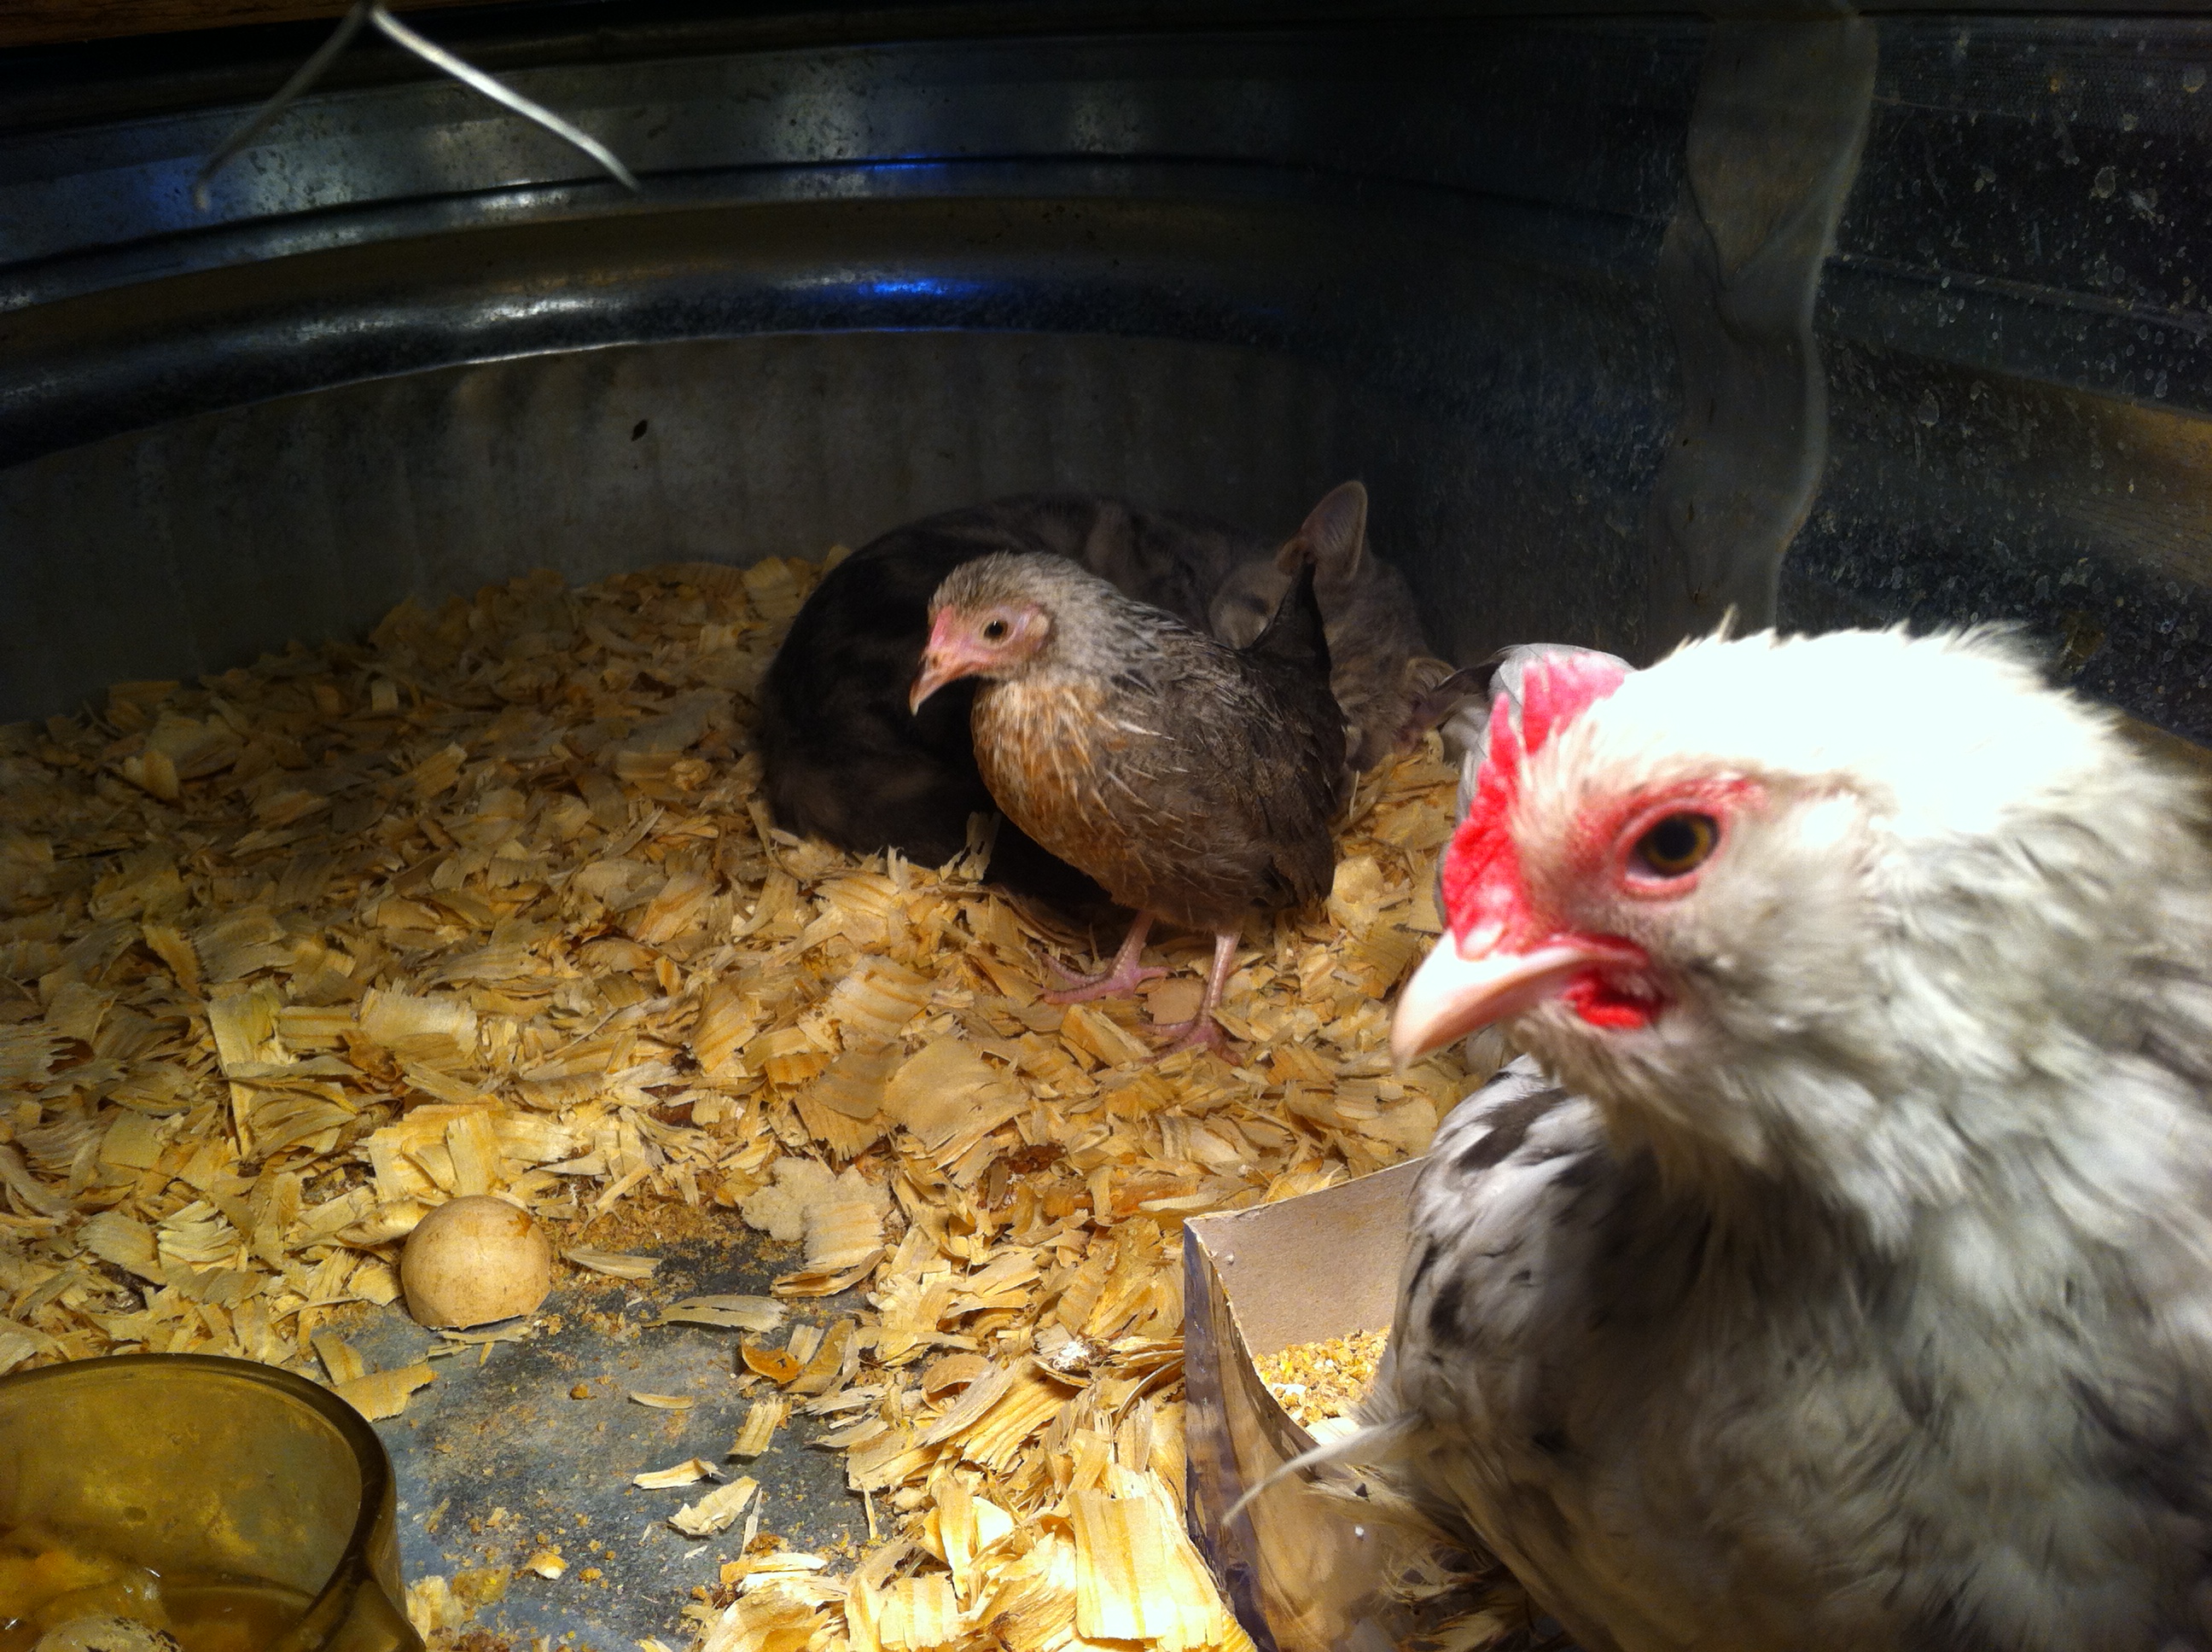 Yes that is my cat at the back trying to stay warm in the brooder